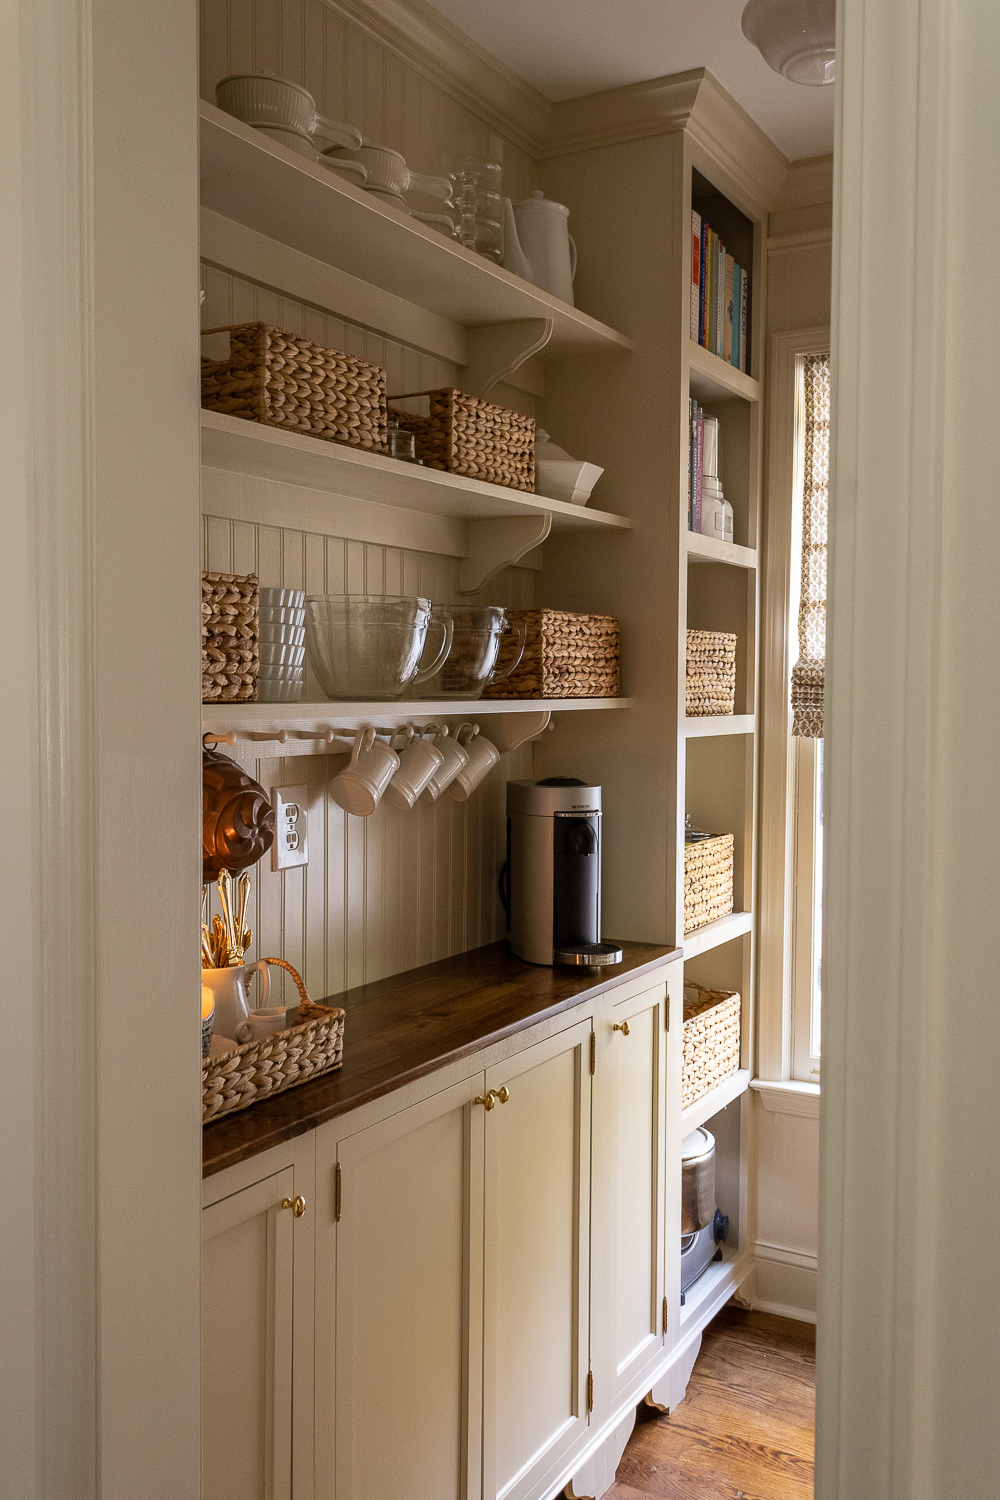 How to Use Kitchen Cabinets as a Pantry - The Homes I Have Made